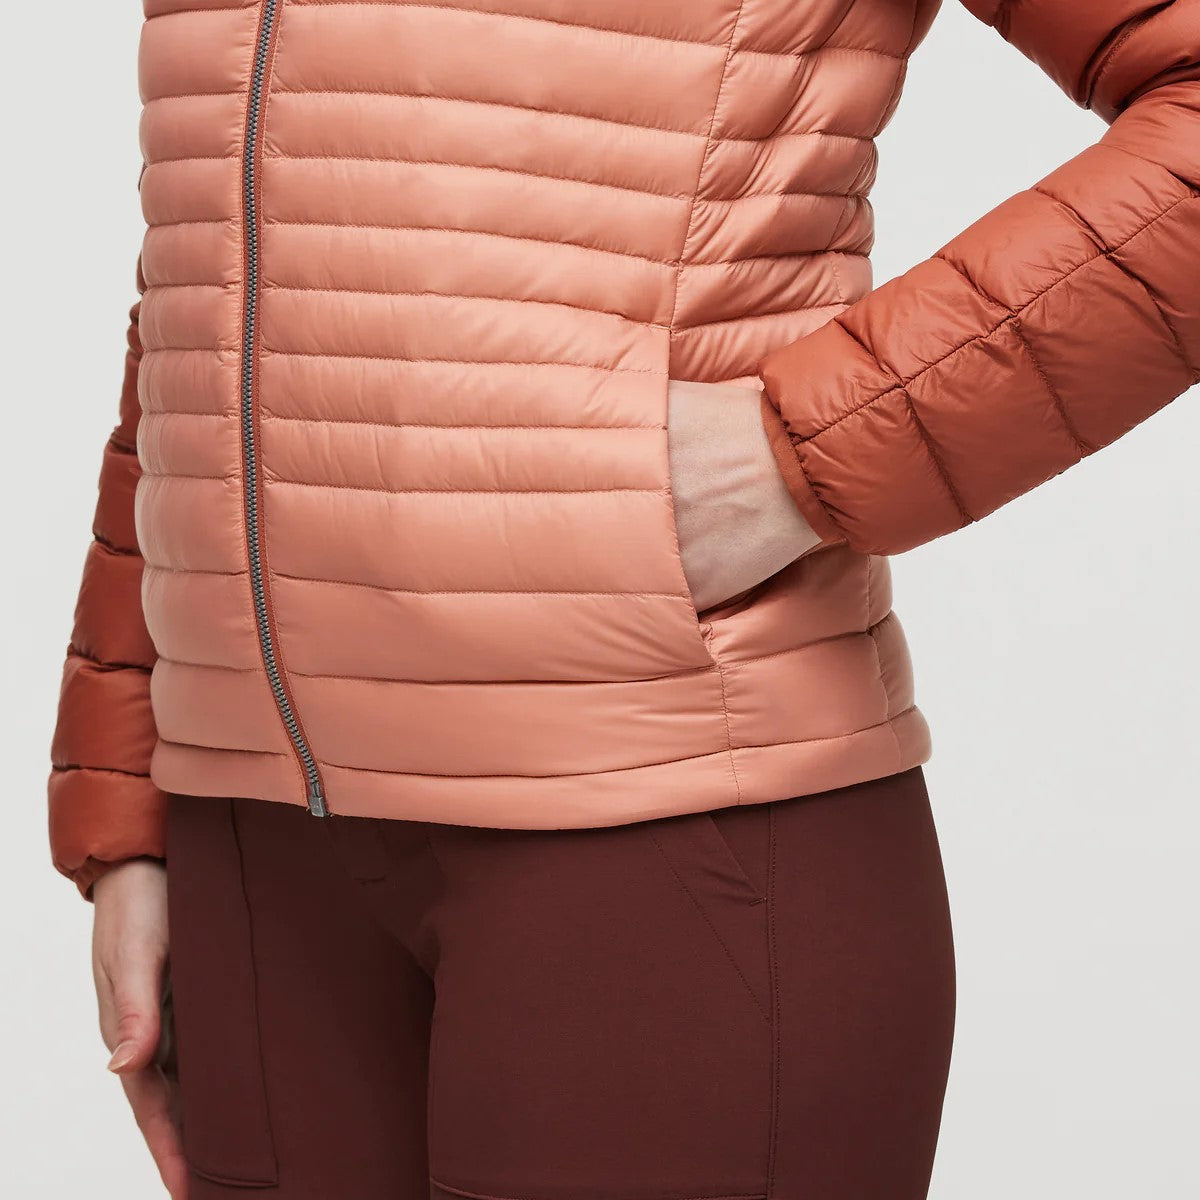 Fuego Down Hooded Women's Jacket - S24